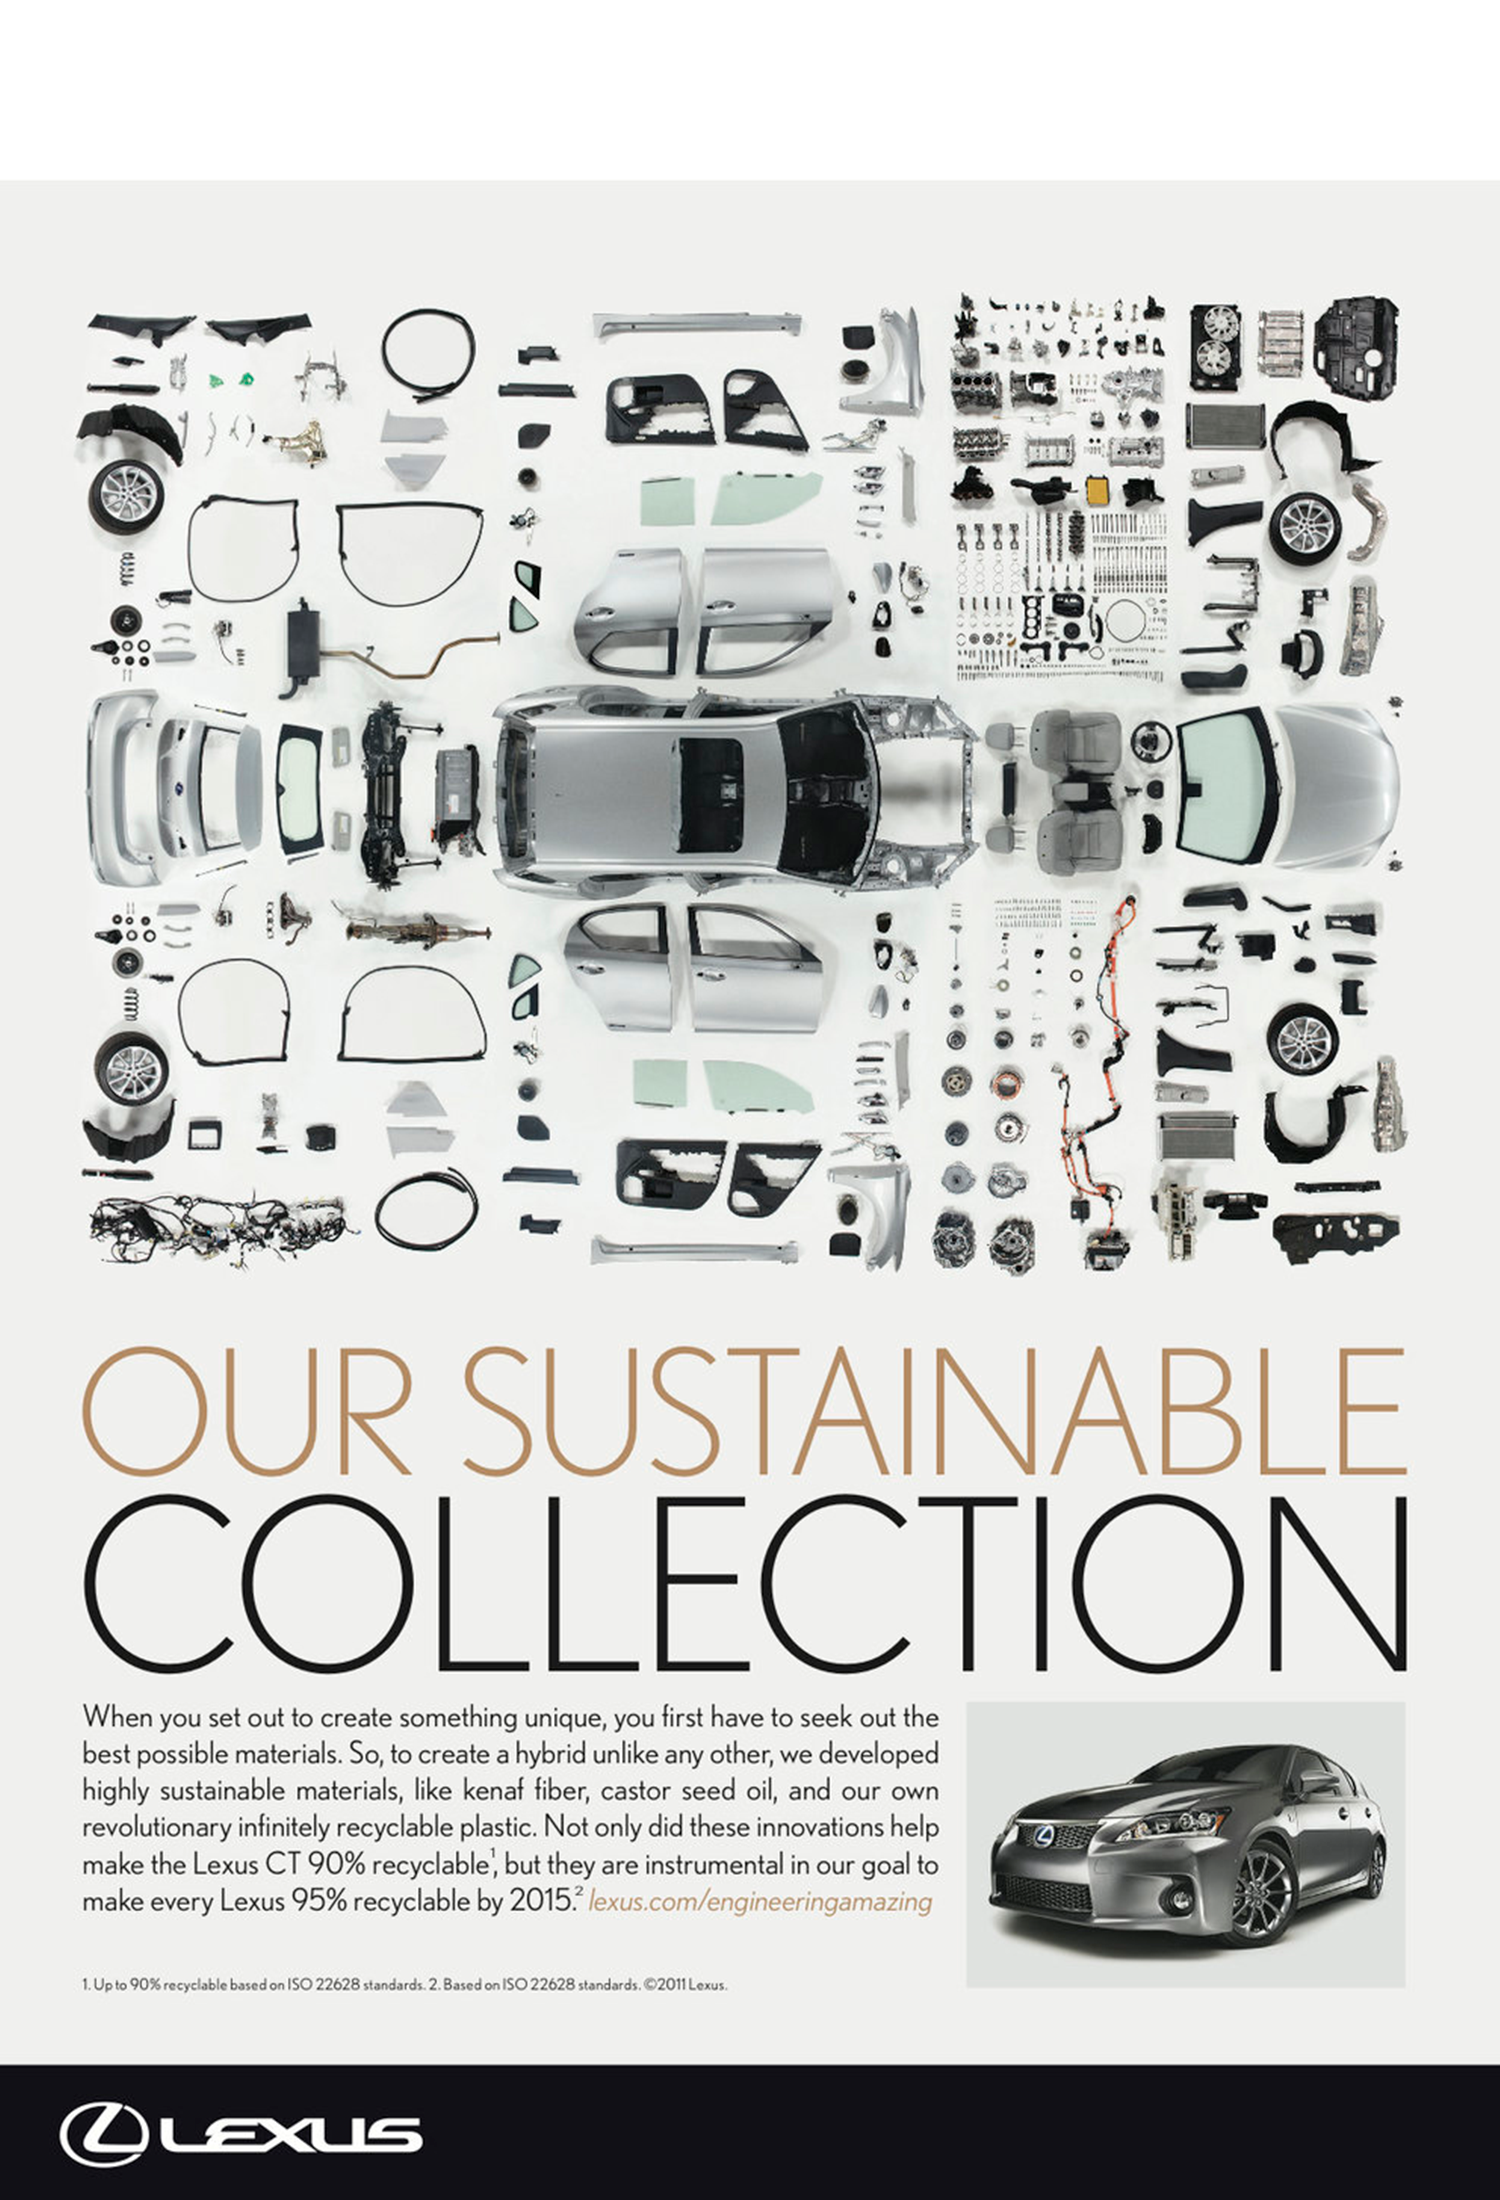  Lexus’ first sustainable collection.